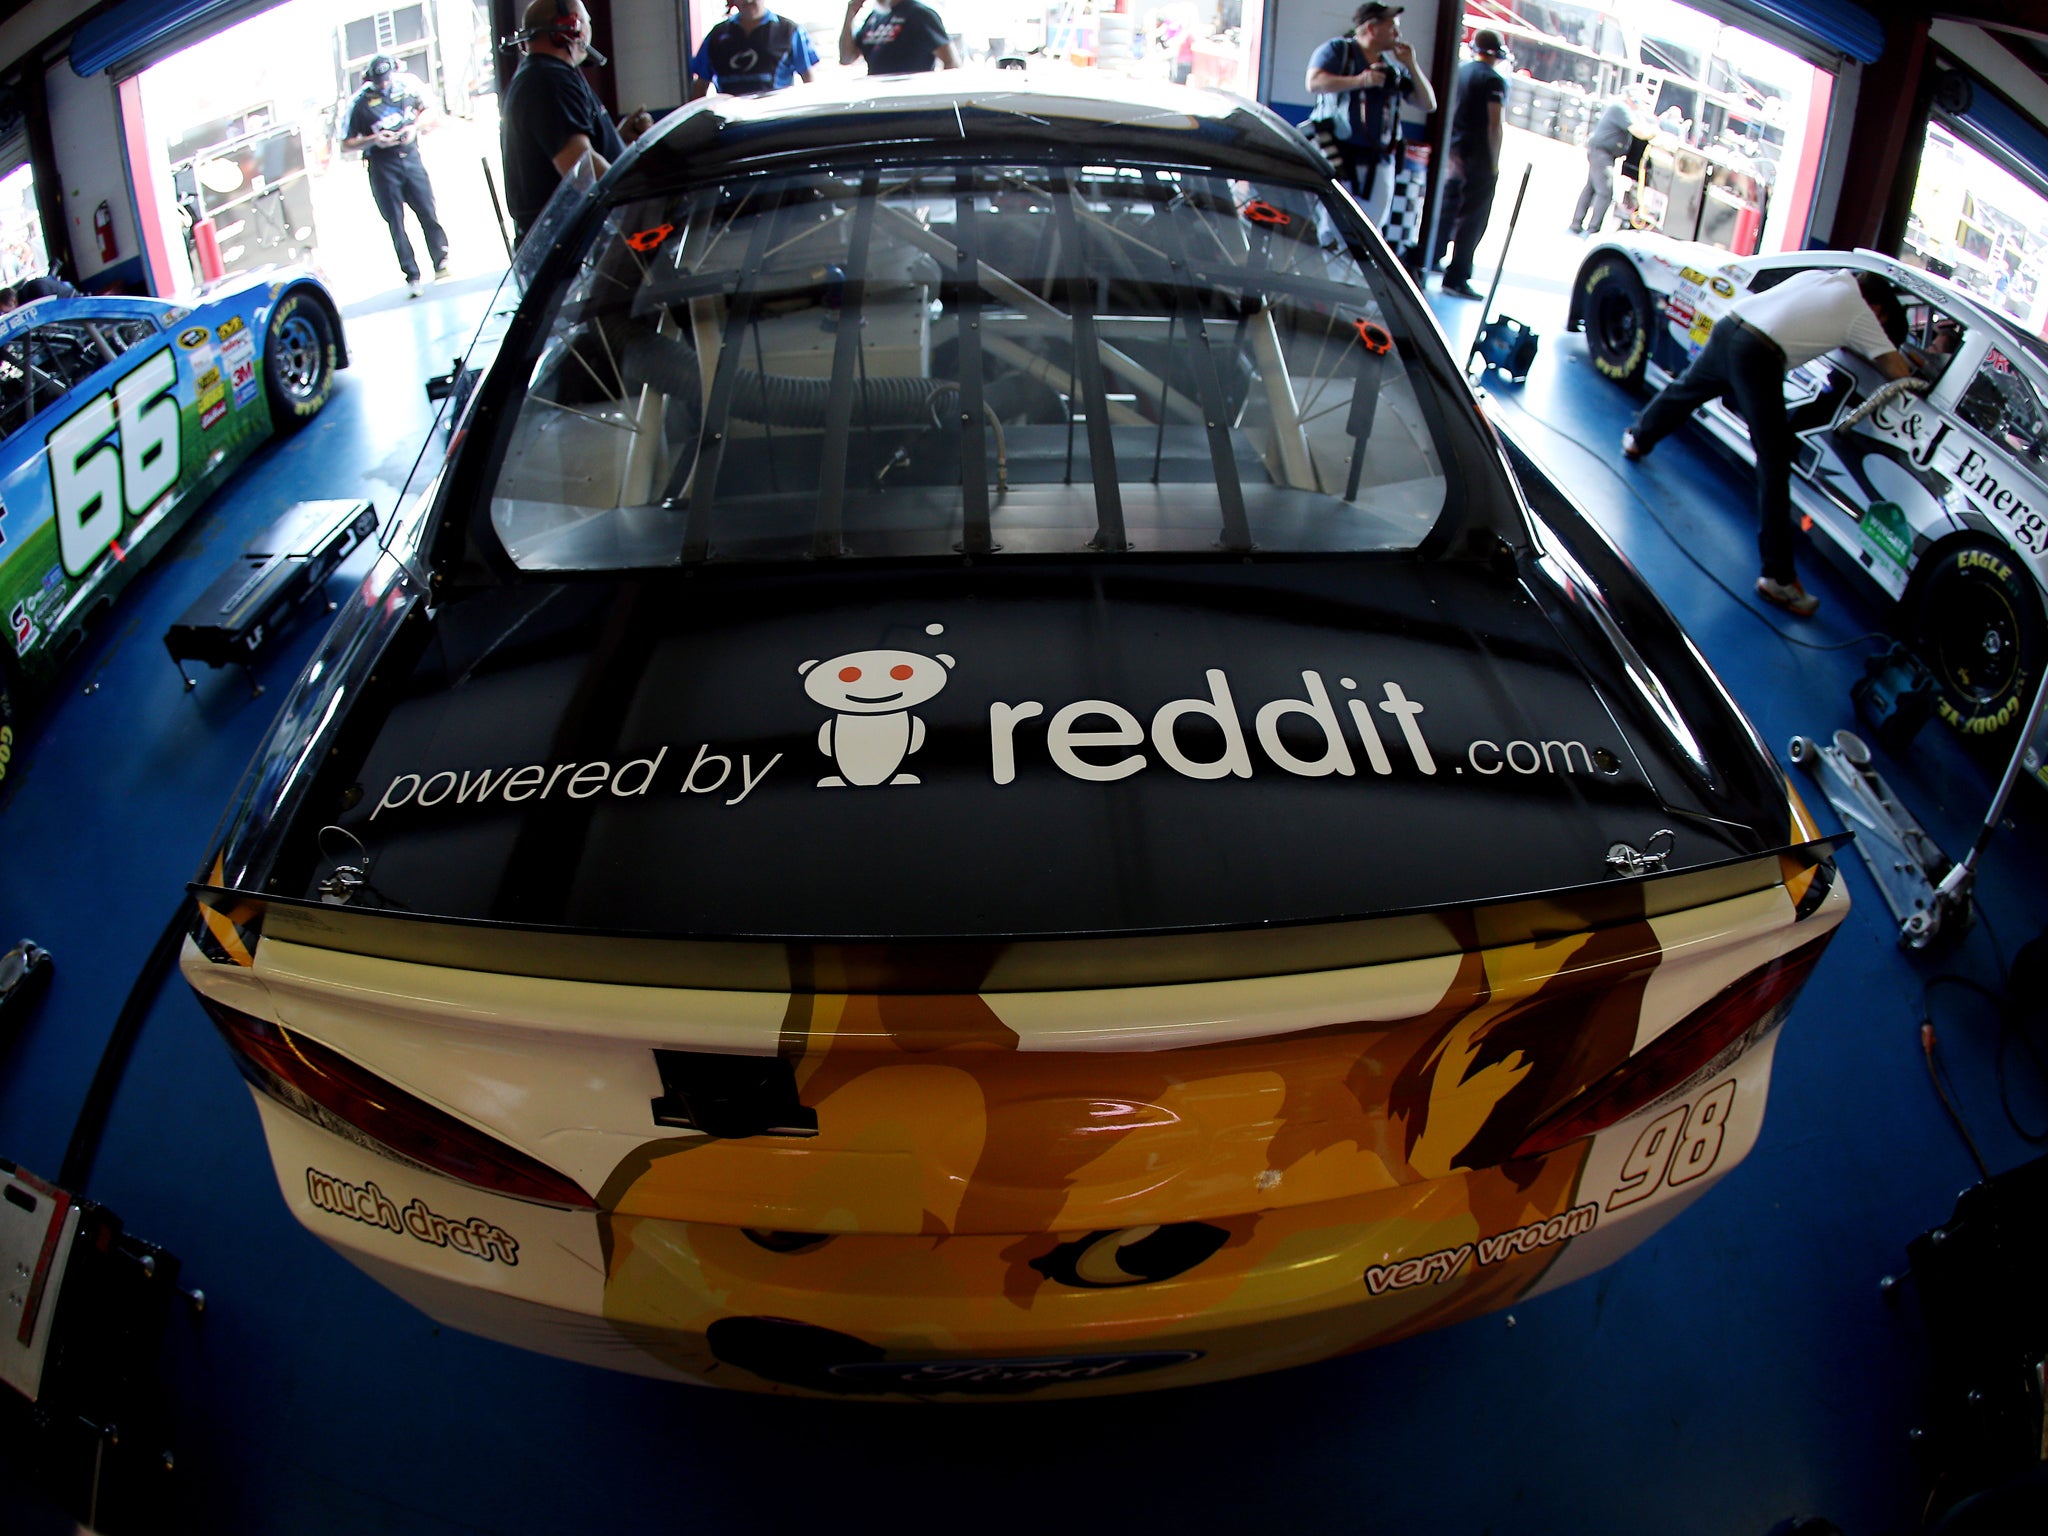 The #98 Dogecoin / Reddit.com Ford, driven by Josh Wise, is seen in the garage during practice for the NASCAR Sprint Cup Series Aaron's 499 at Talladega Superspeedway on May 2, 2014 in Talladega, Alabama